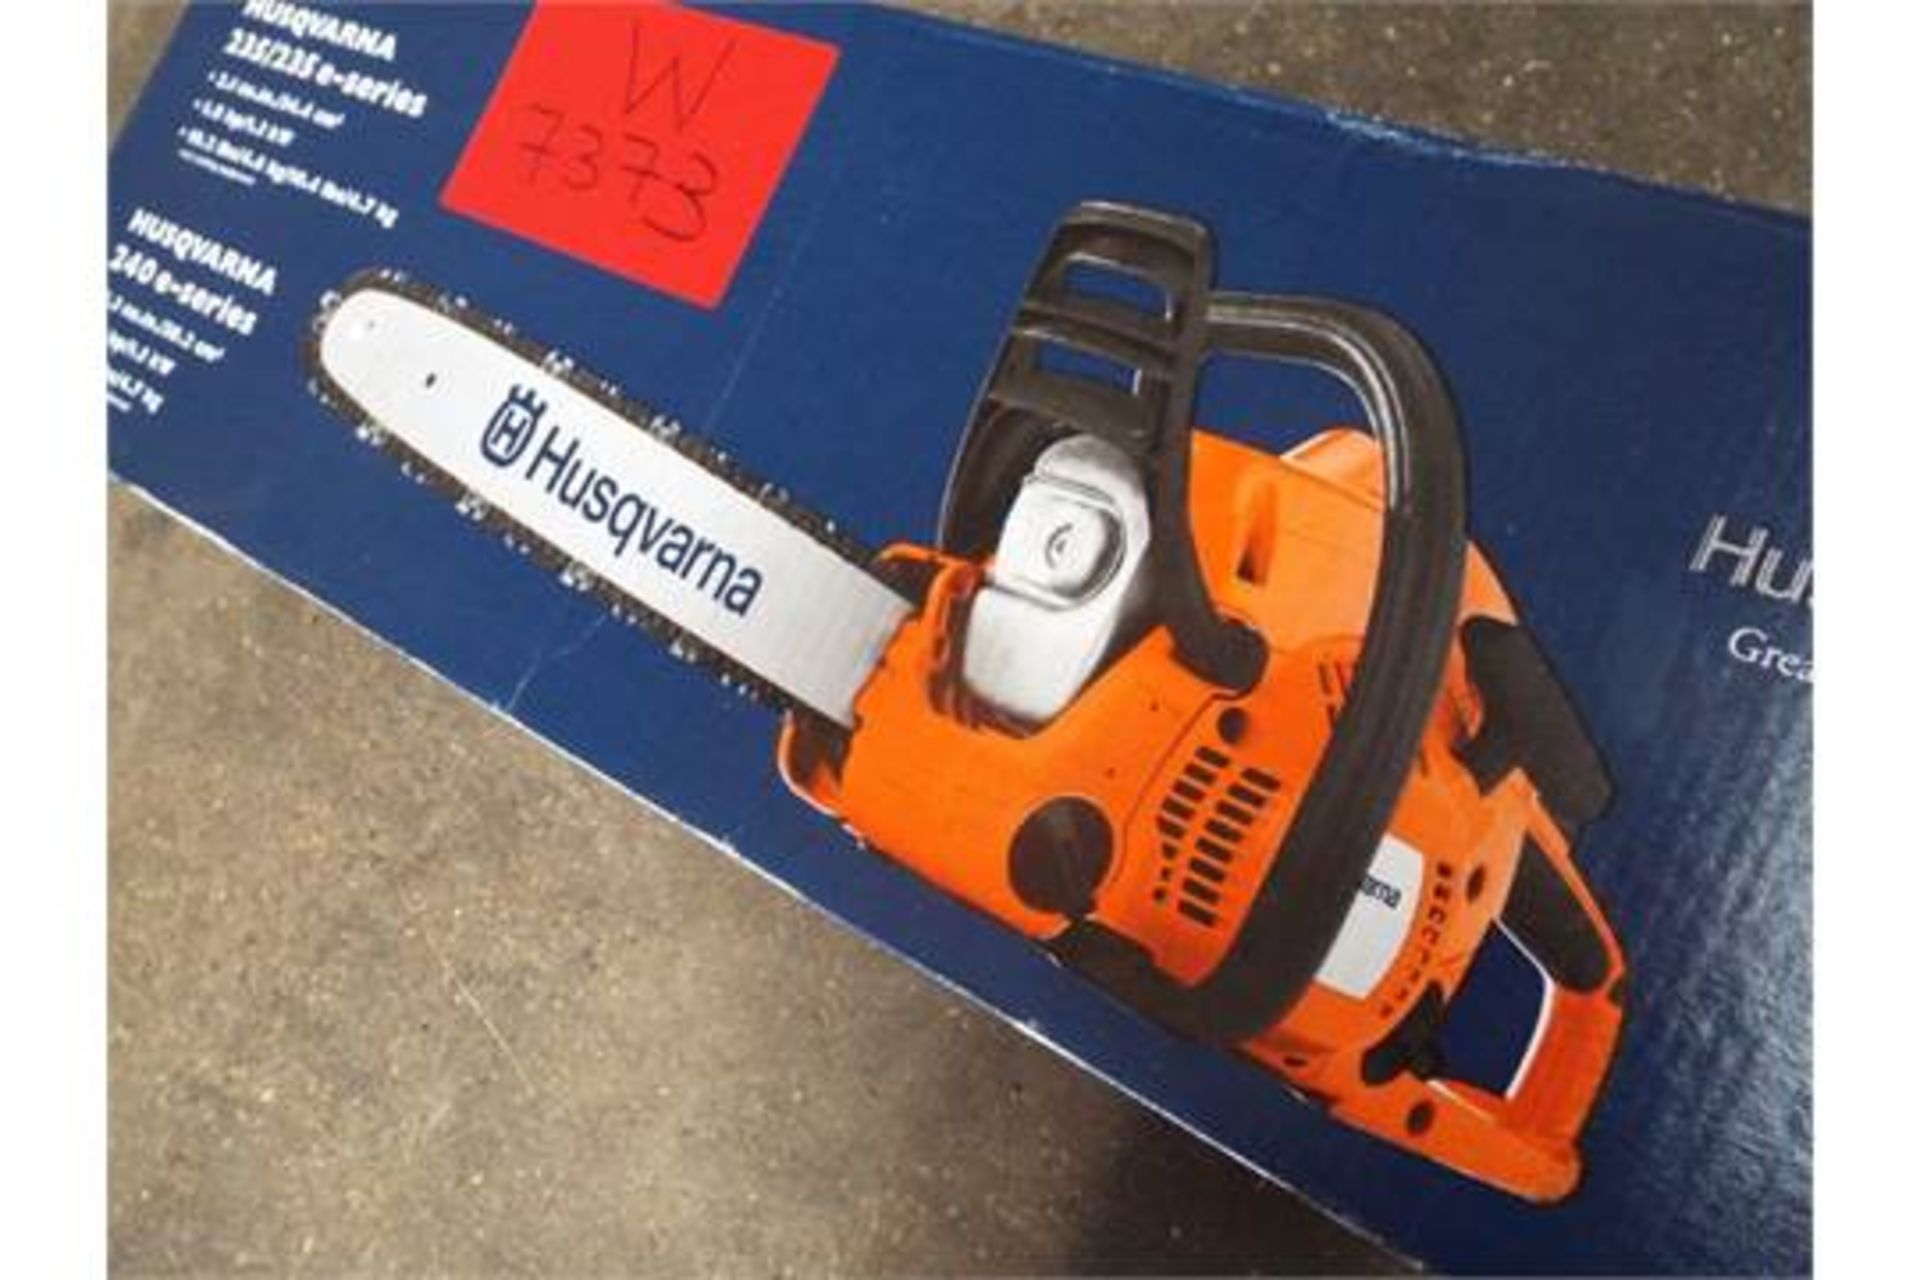 New Unused Husqvarna 240 E-Series Chainsaw with 16" Blade - Image 2 of 6